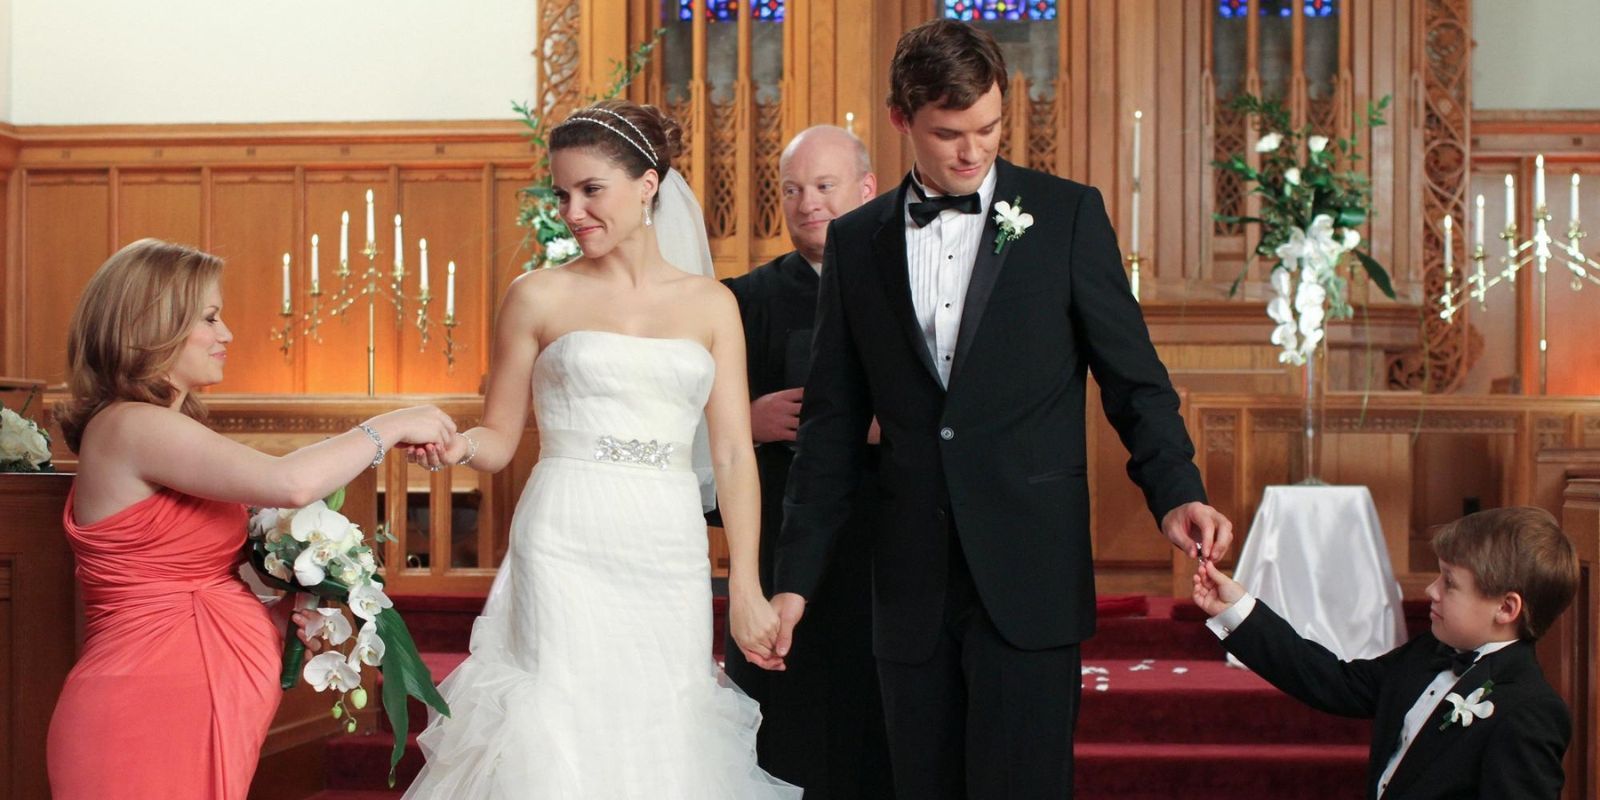 Brooke and Julian walking up the aisle at their wedding